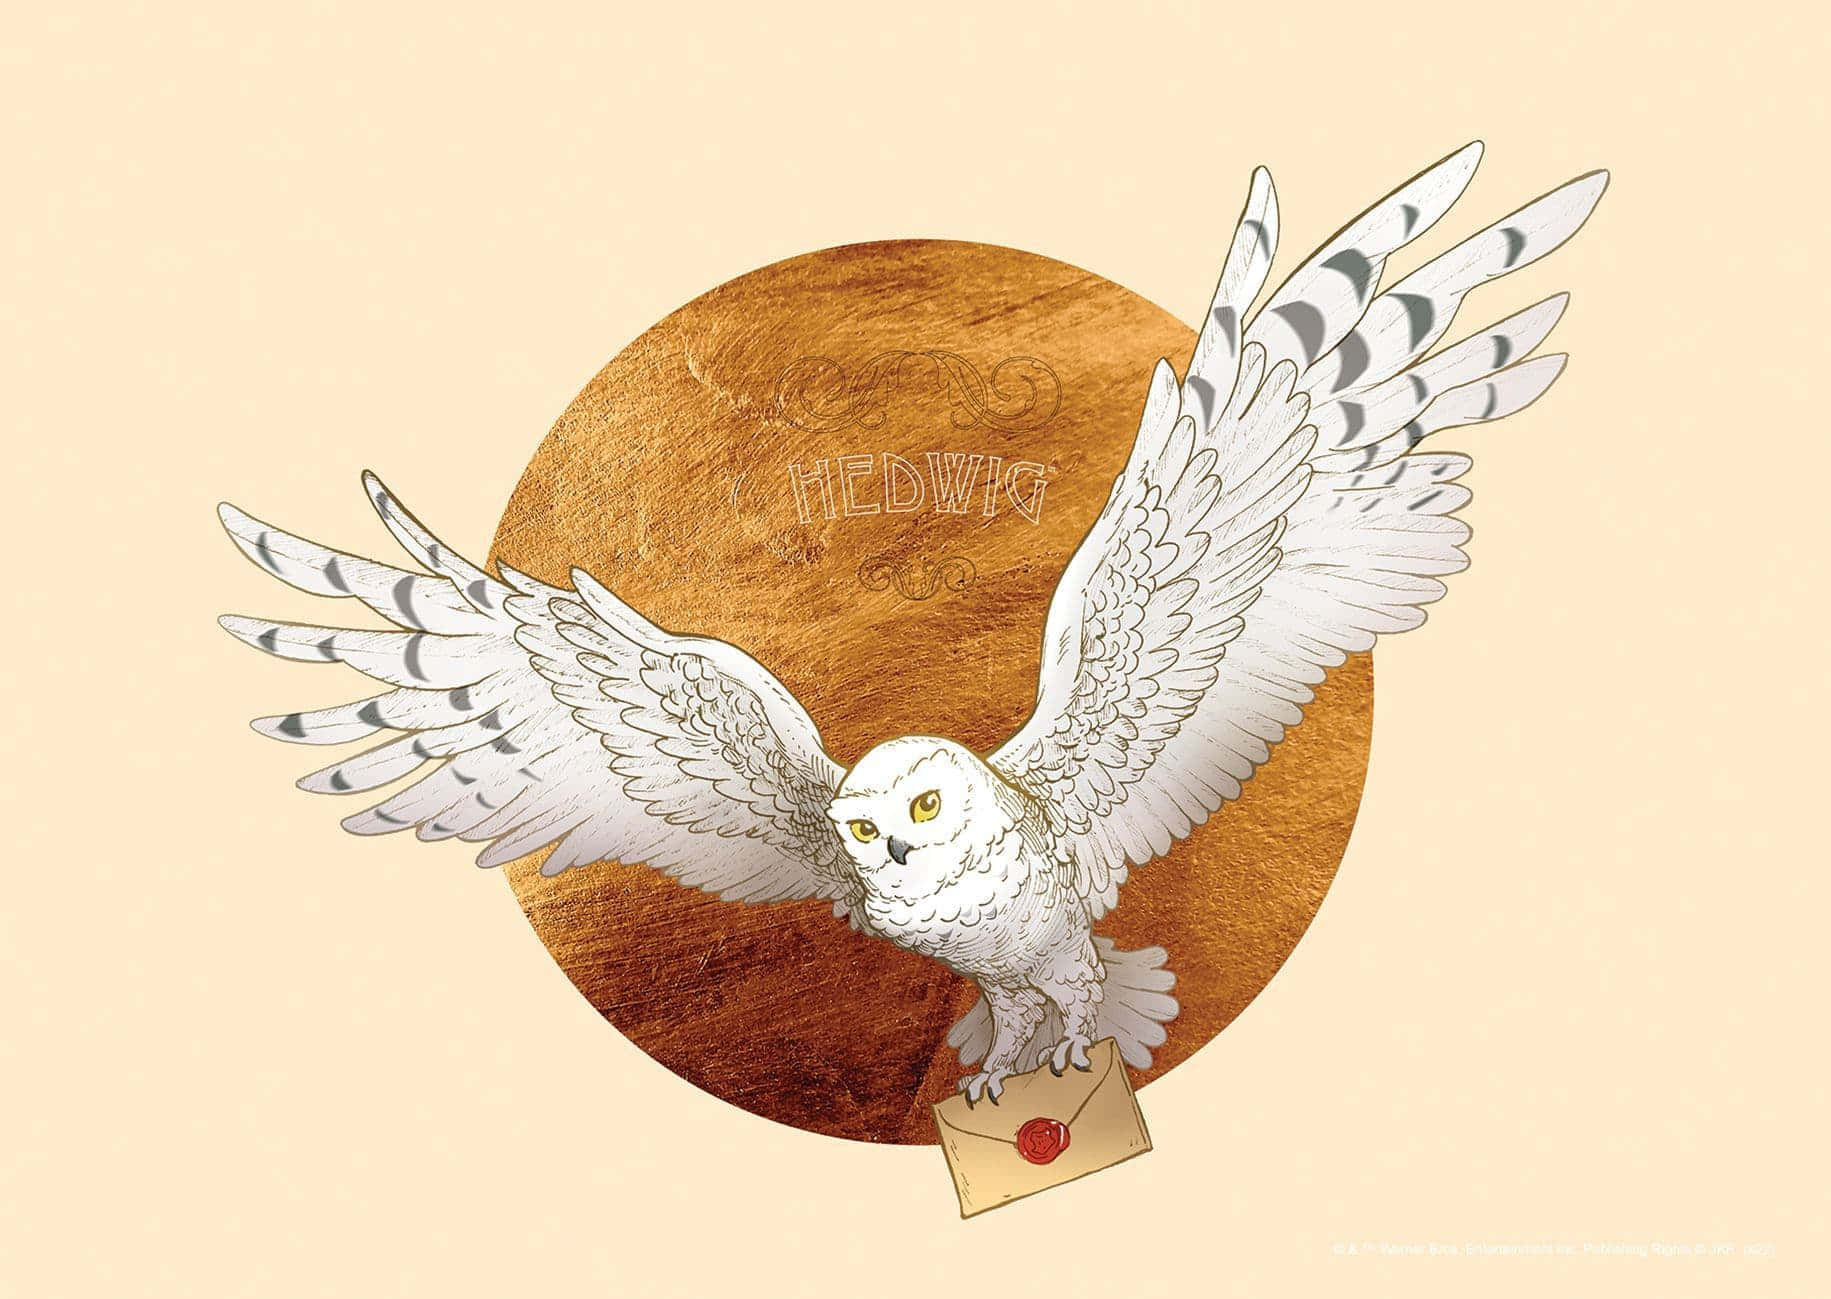 Hedwig by Atropicus on DeviantArt  Harry potter background Harry potter  painting Harry potter illustrations